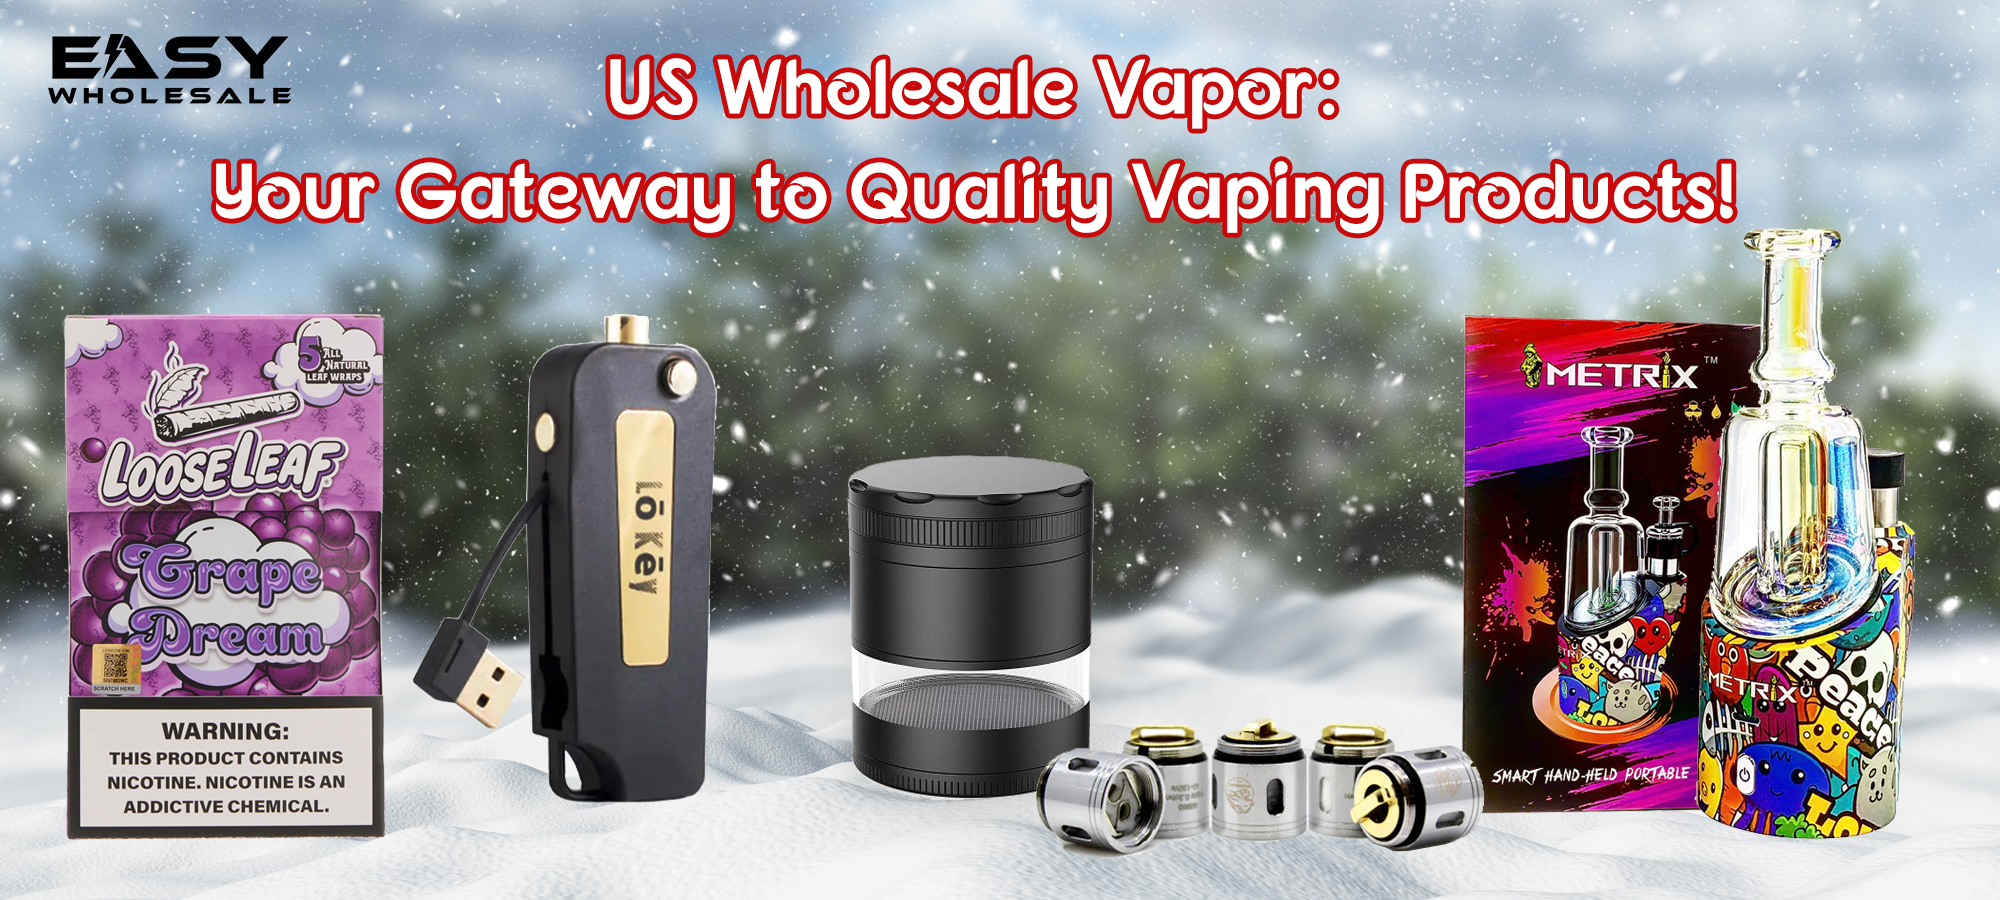 US Wholesale Vapor: Your Gateway to Quality Vaping Products!